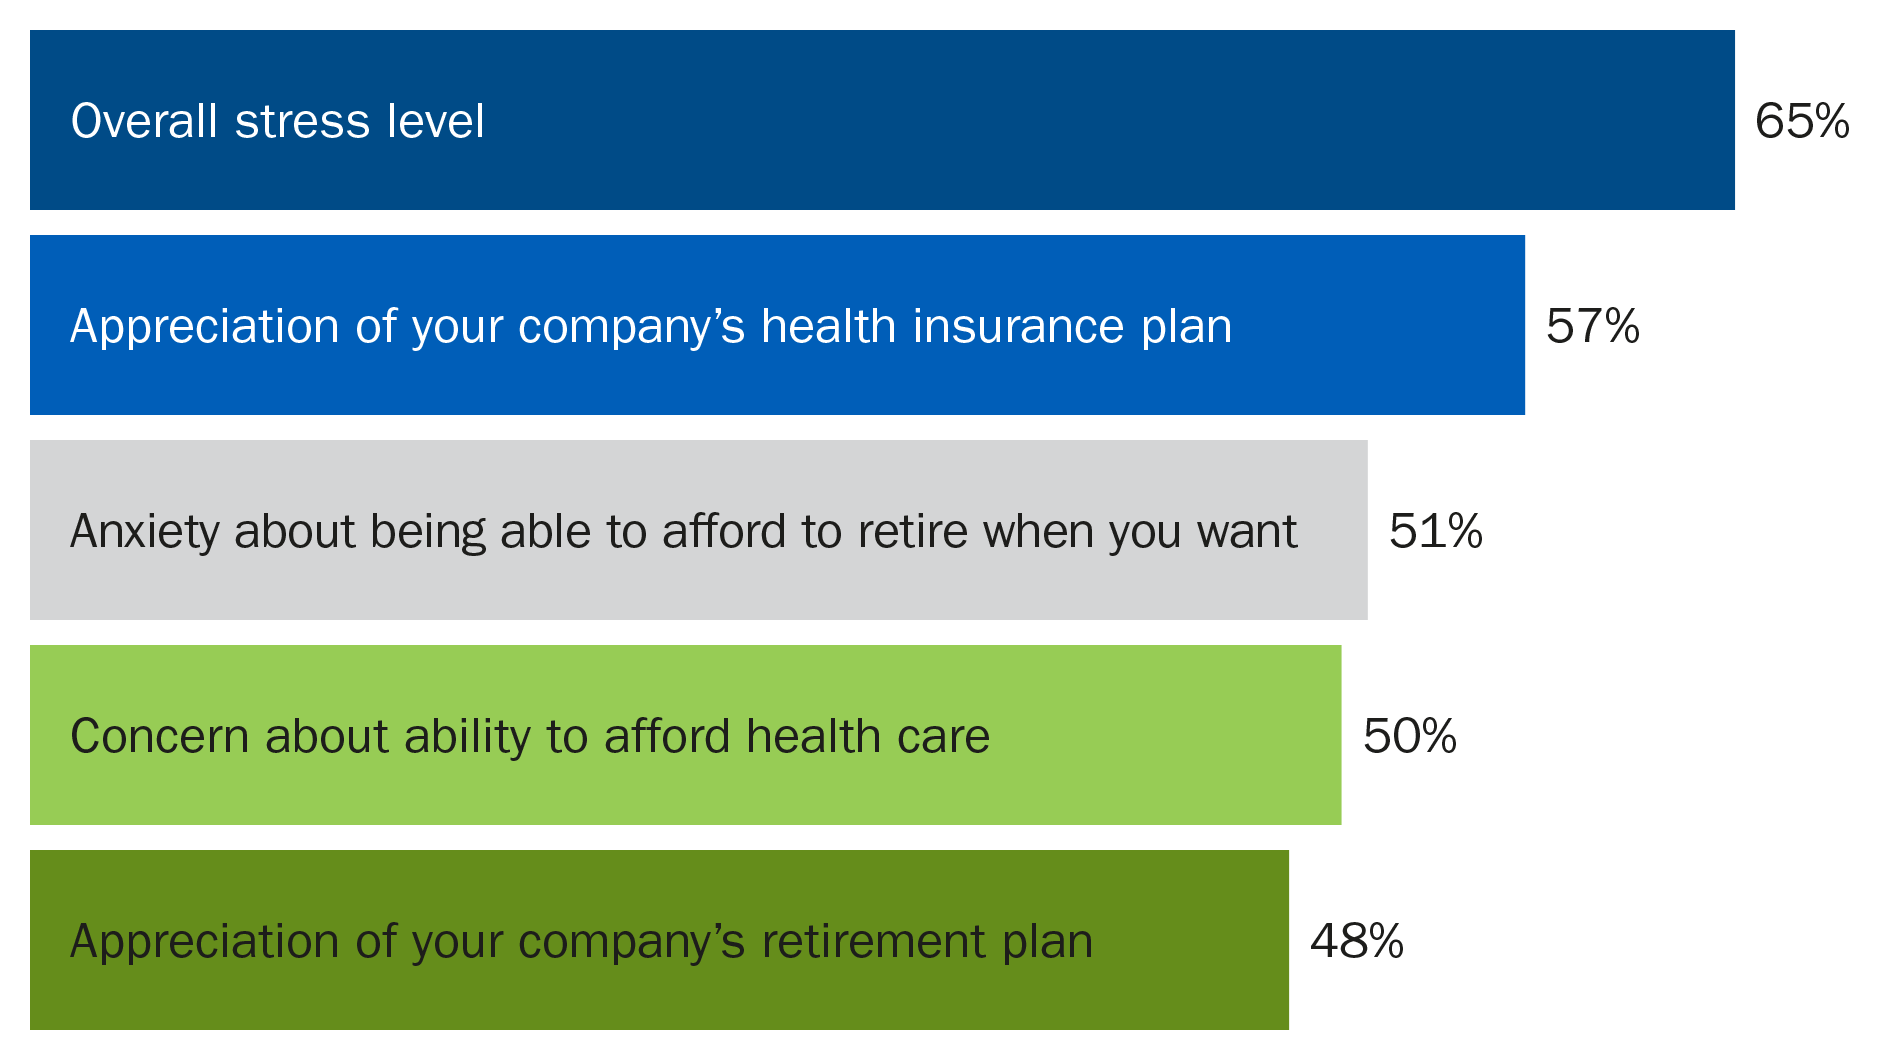 65% of participants have more overall stress since the pandemic started and half are more anxious about being able to afford to retire.